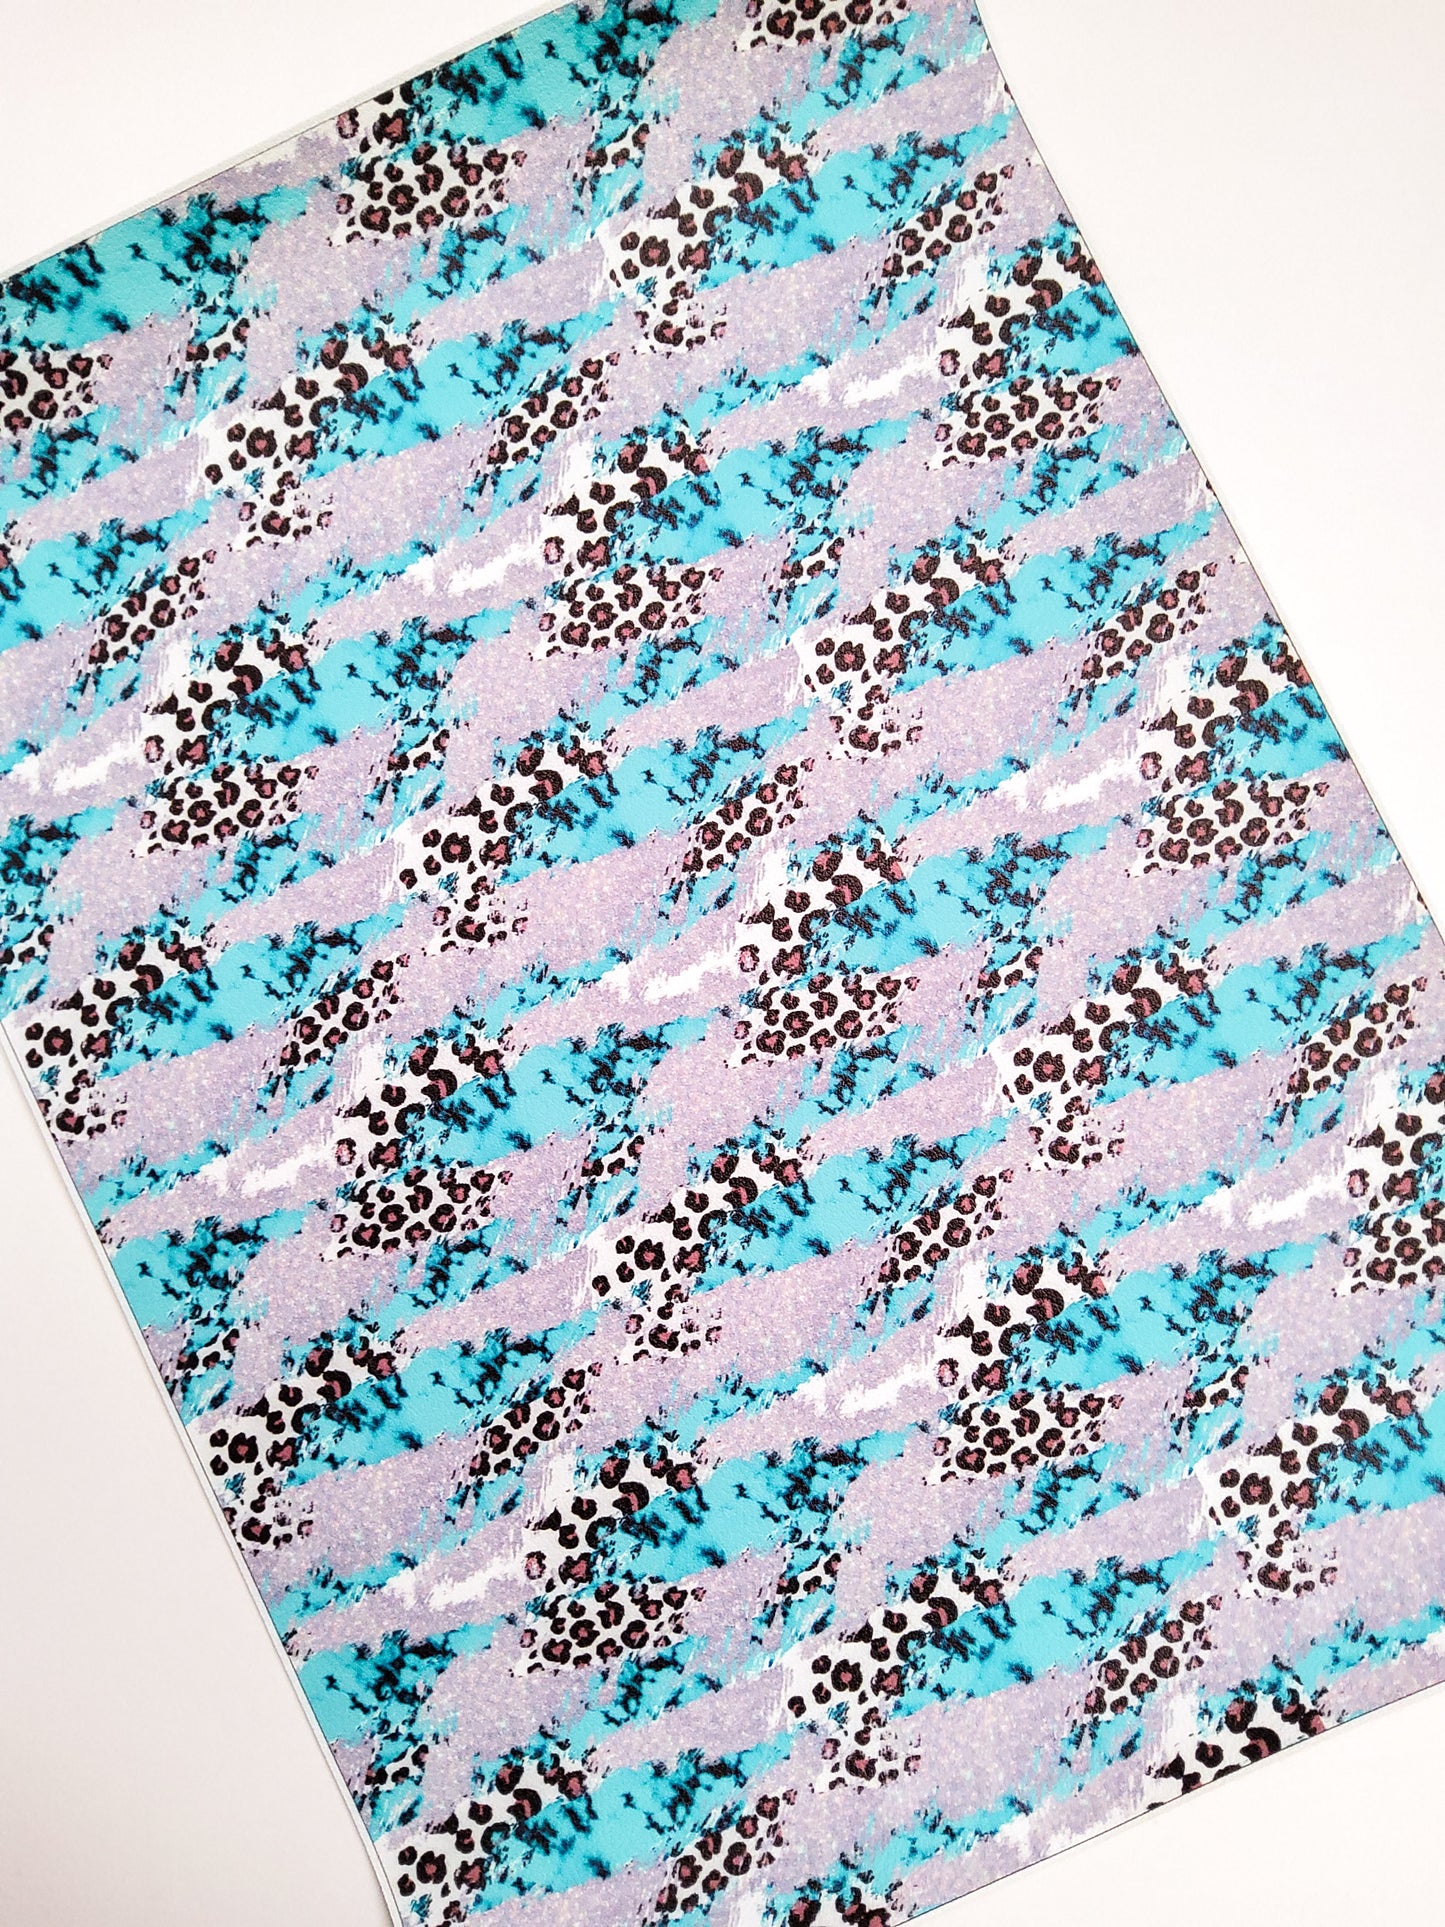 Teal and Gray Animal Print 9x12 faux leather sheet